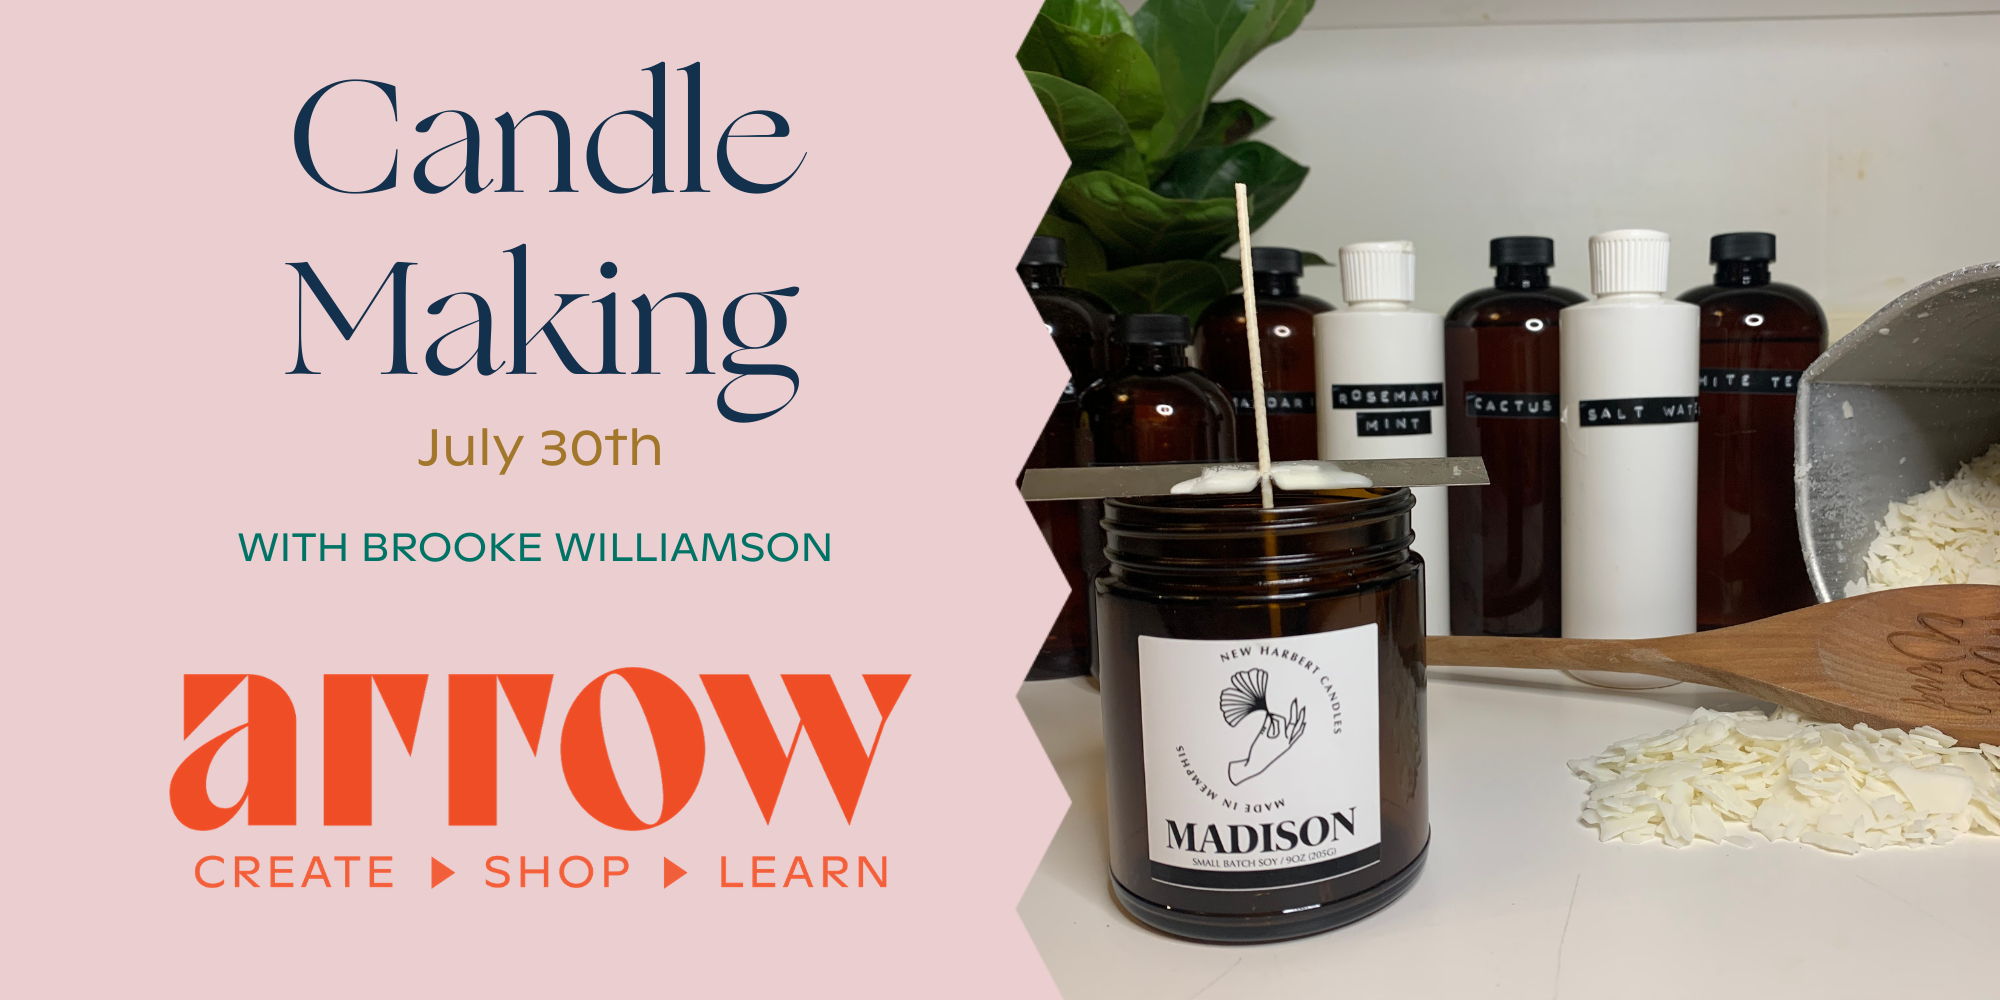 Candle Making Class with Brooke Williamson promotional image